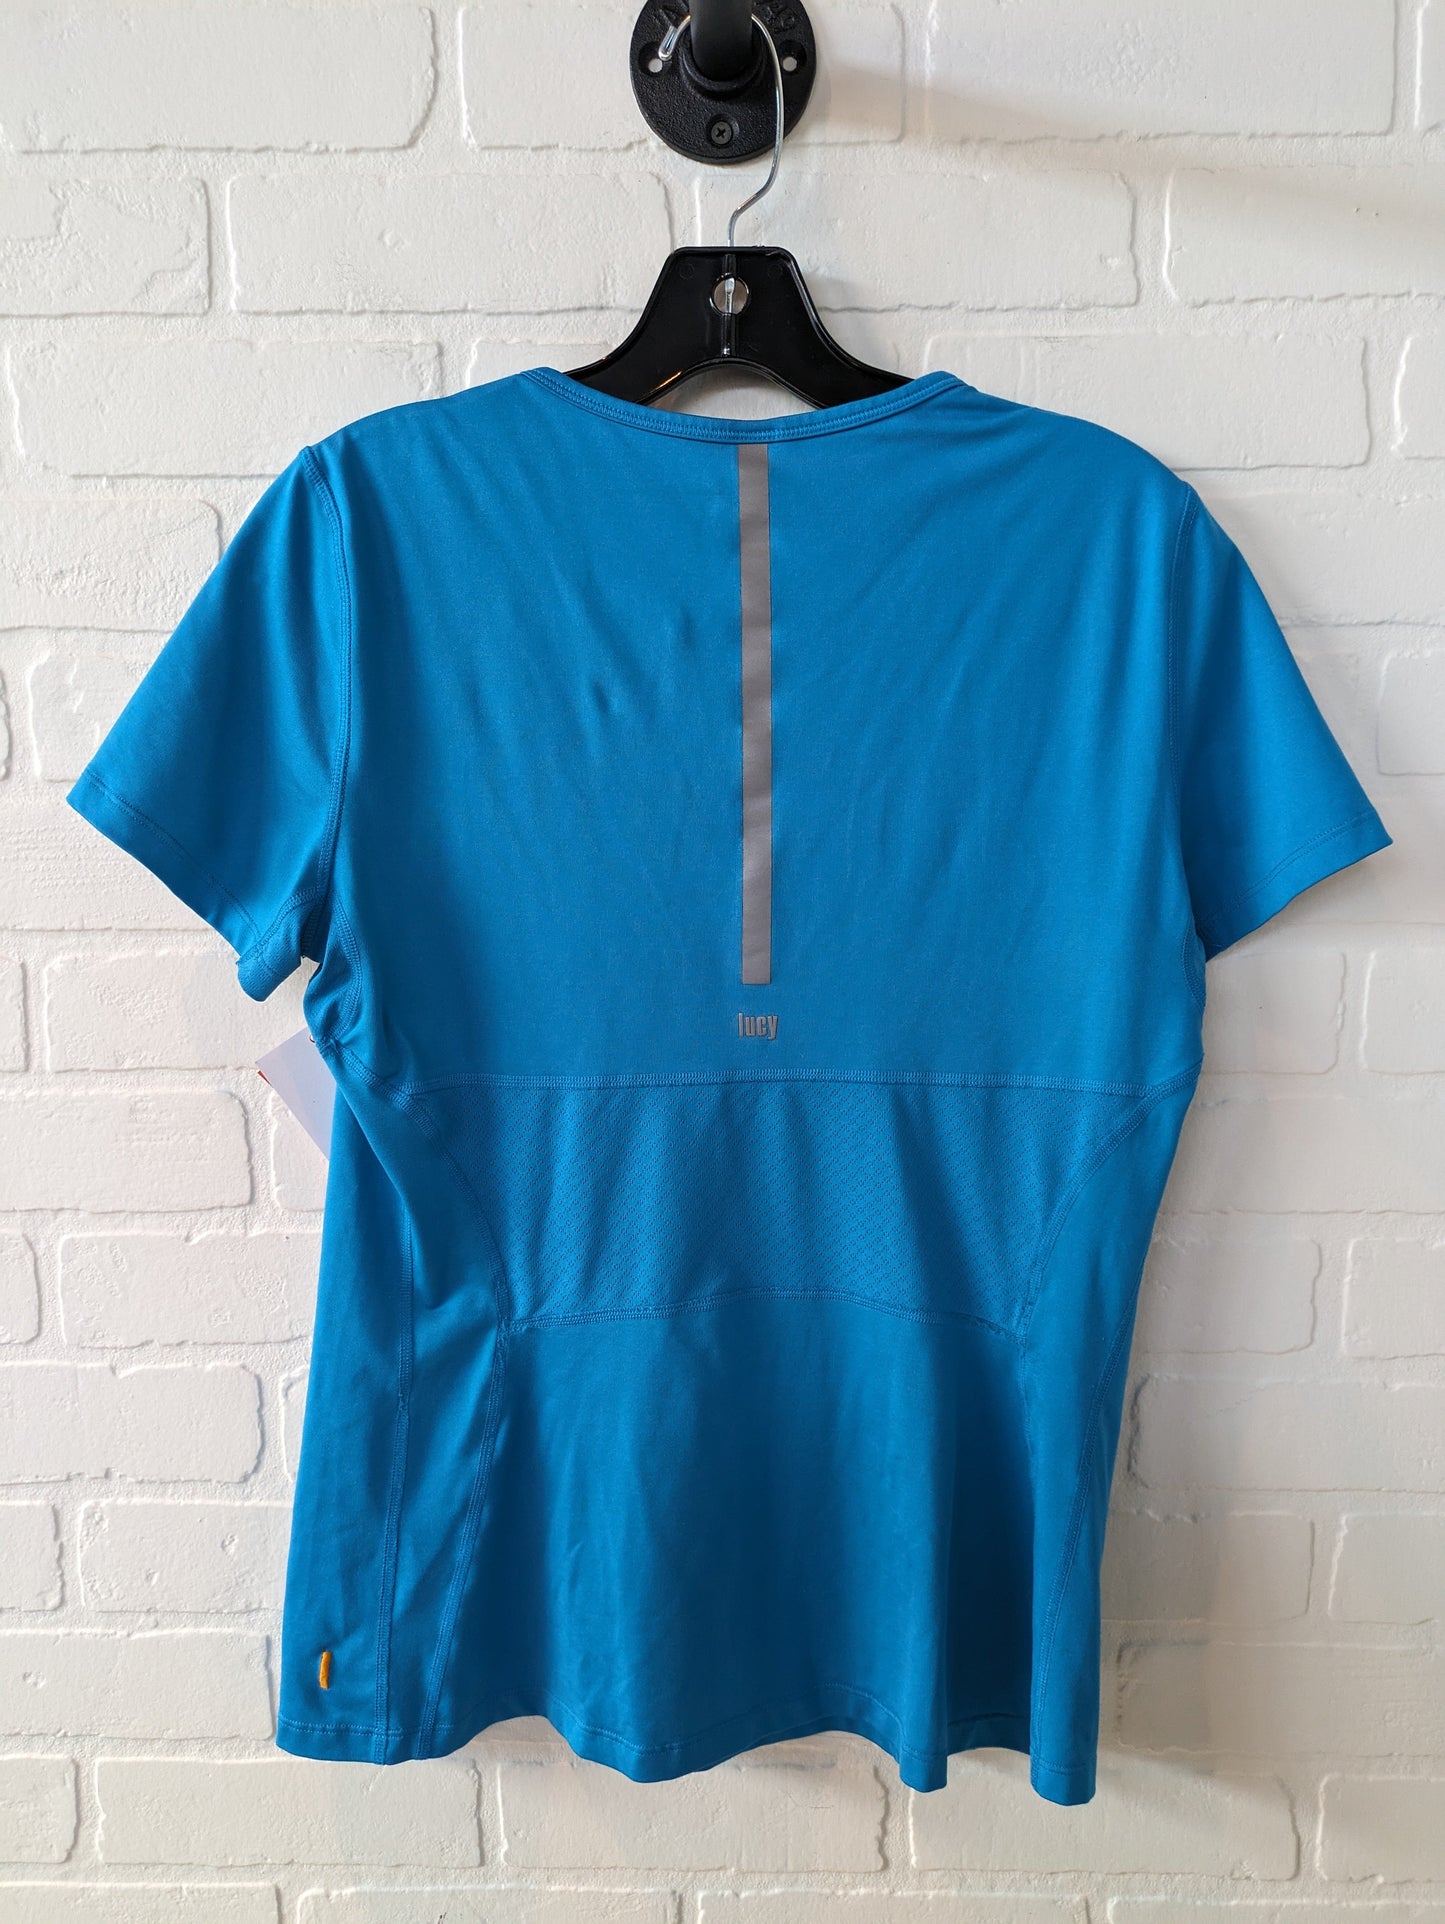 Athletic Top Short Sleeve By Lucy  Size: M